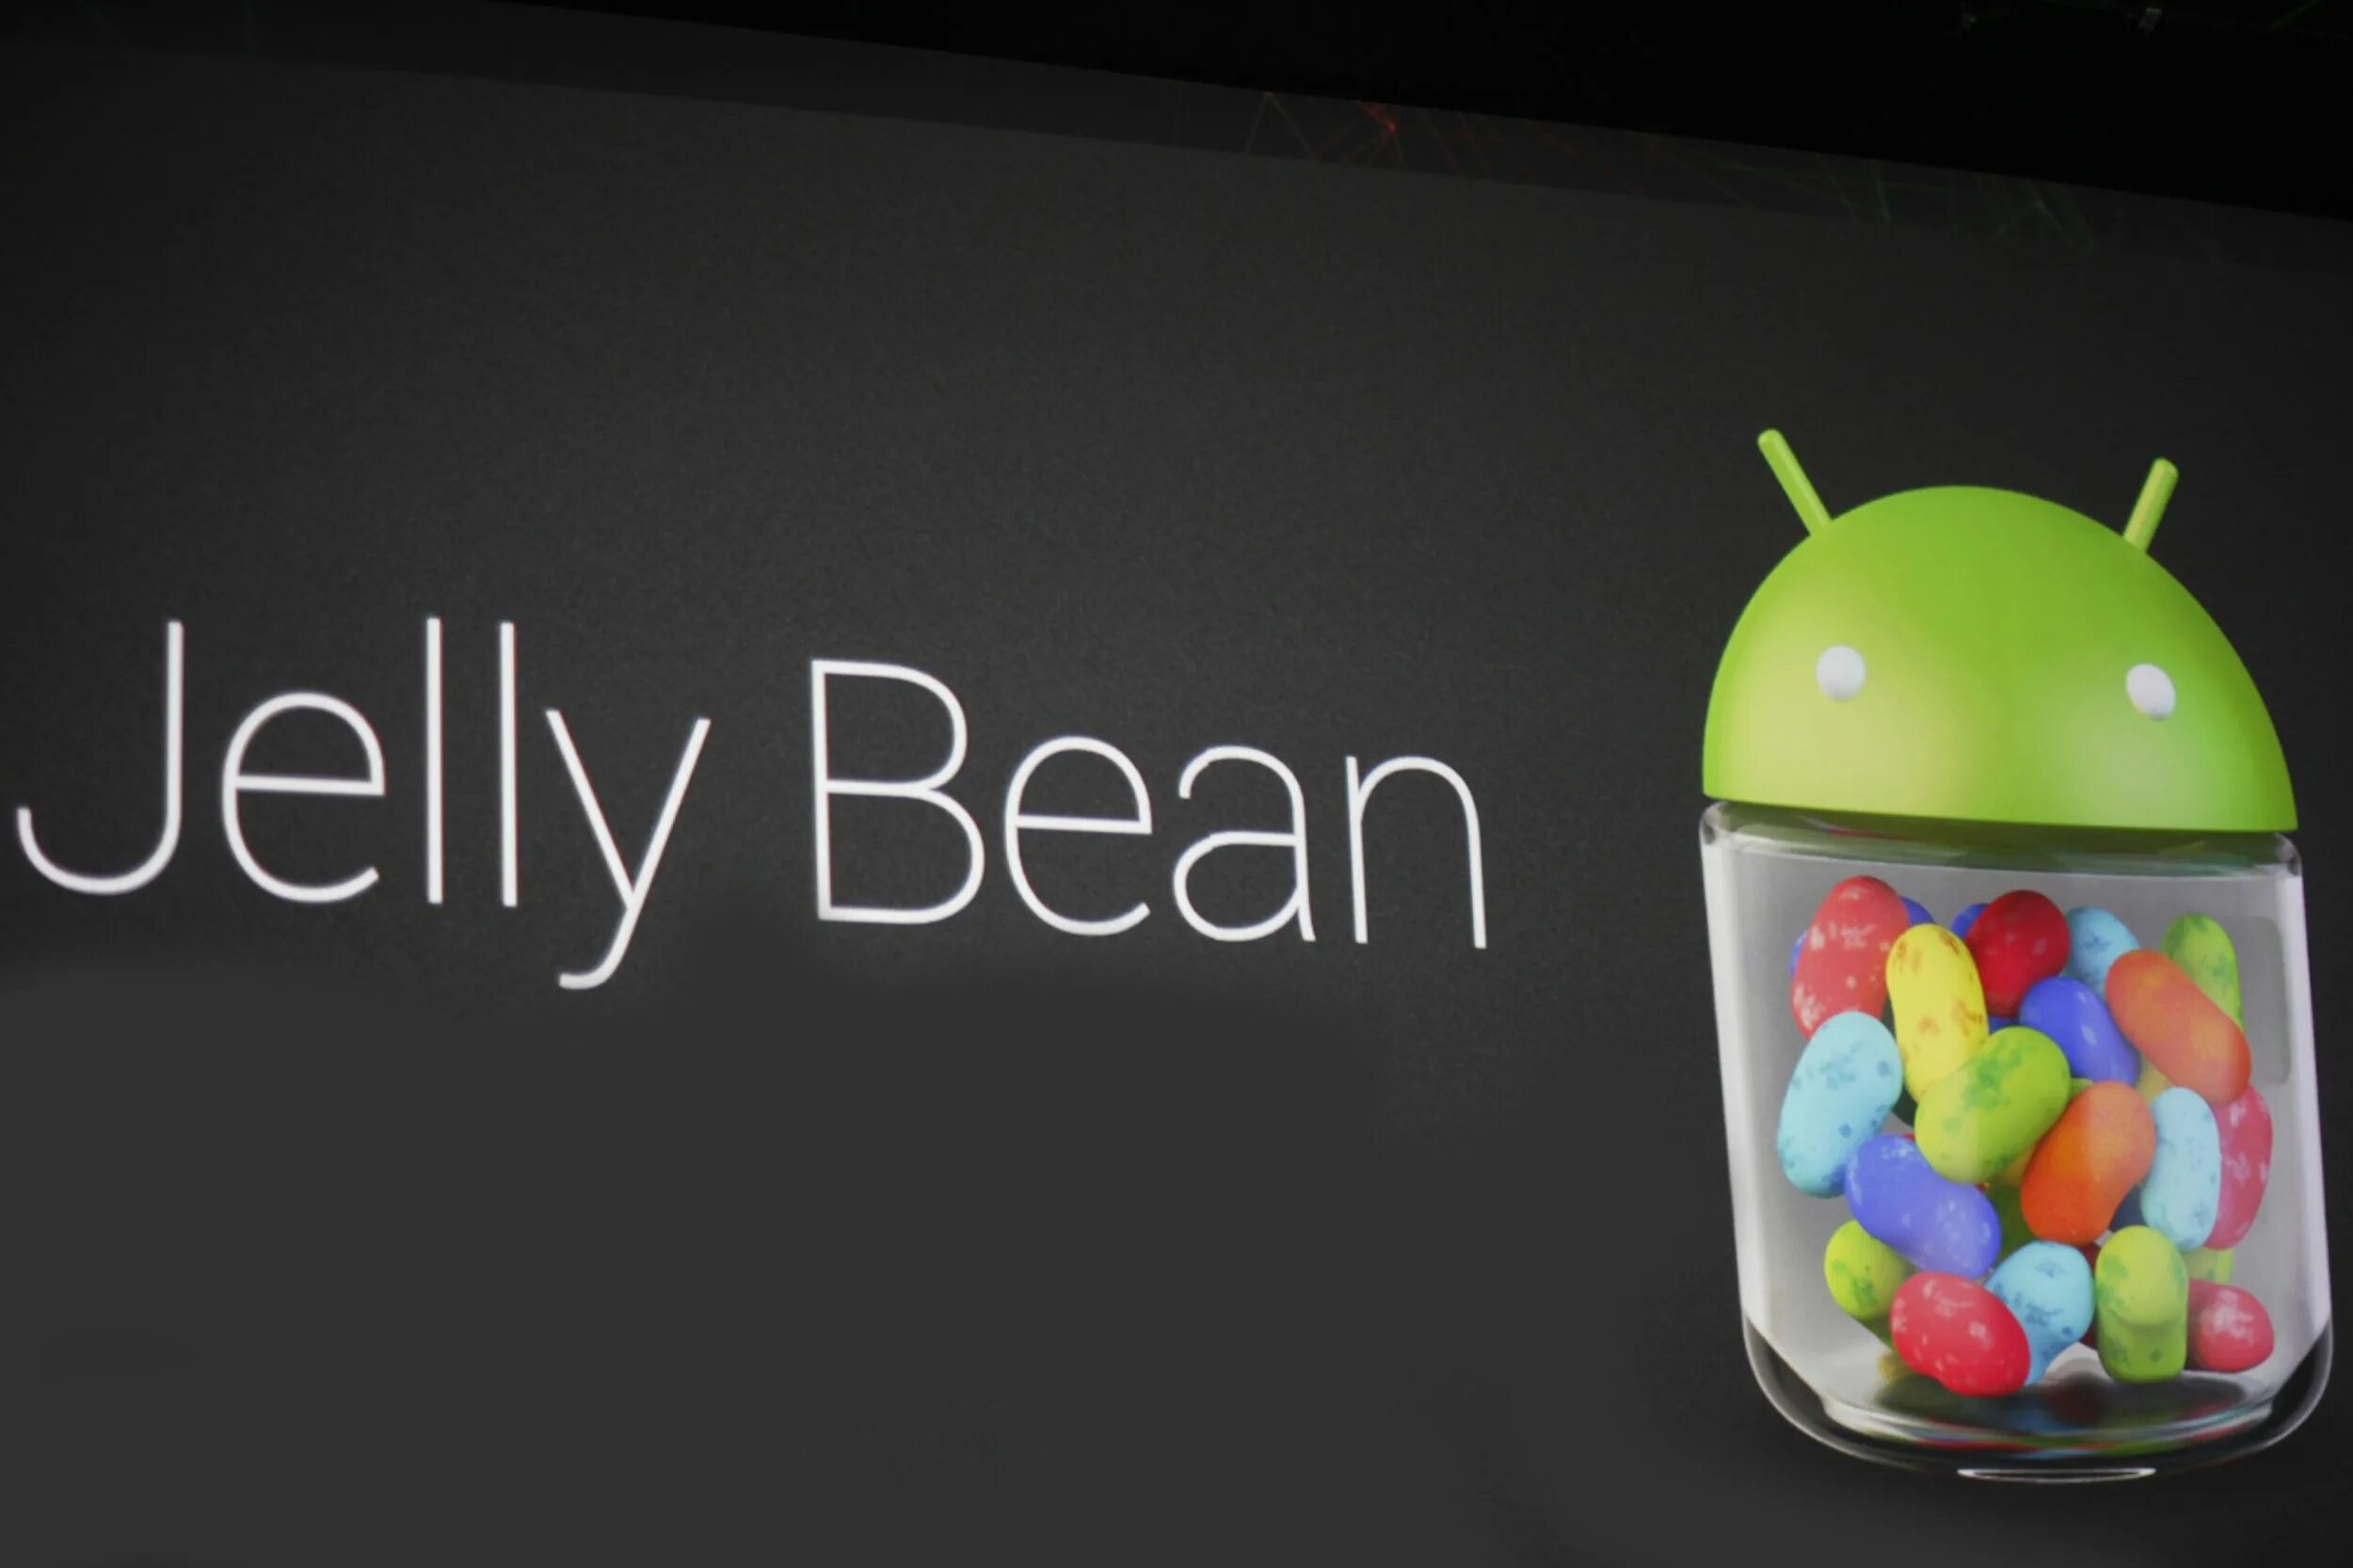 Jelly android. Android 4.1 / 4.2 / 4.3 «Jelly Bean». Андроид Джелли Бин. Android 4.1-4.3 Jelly Bean. Android 4.1 Jelly Bean.